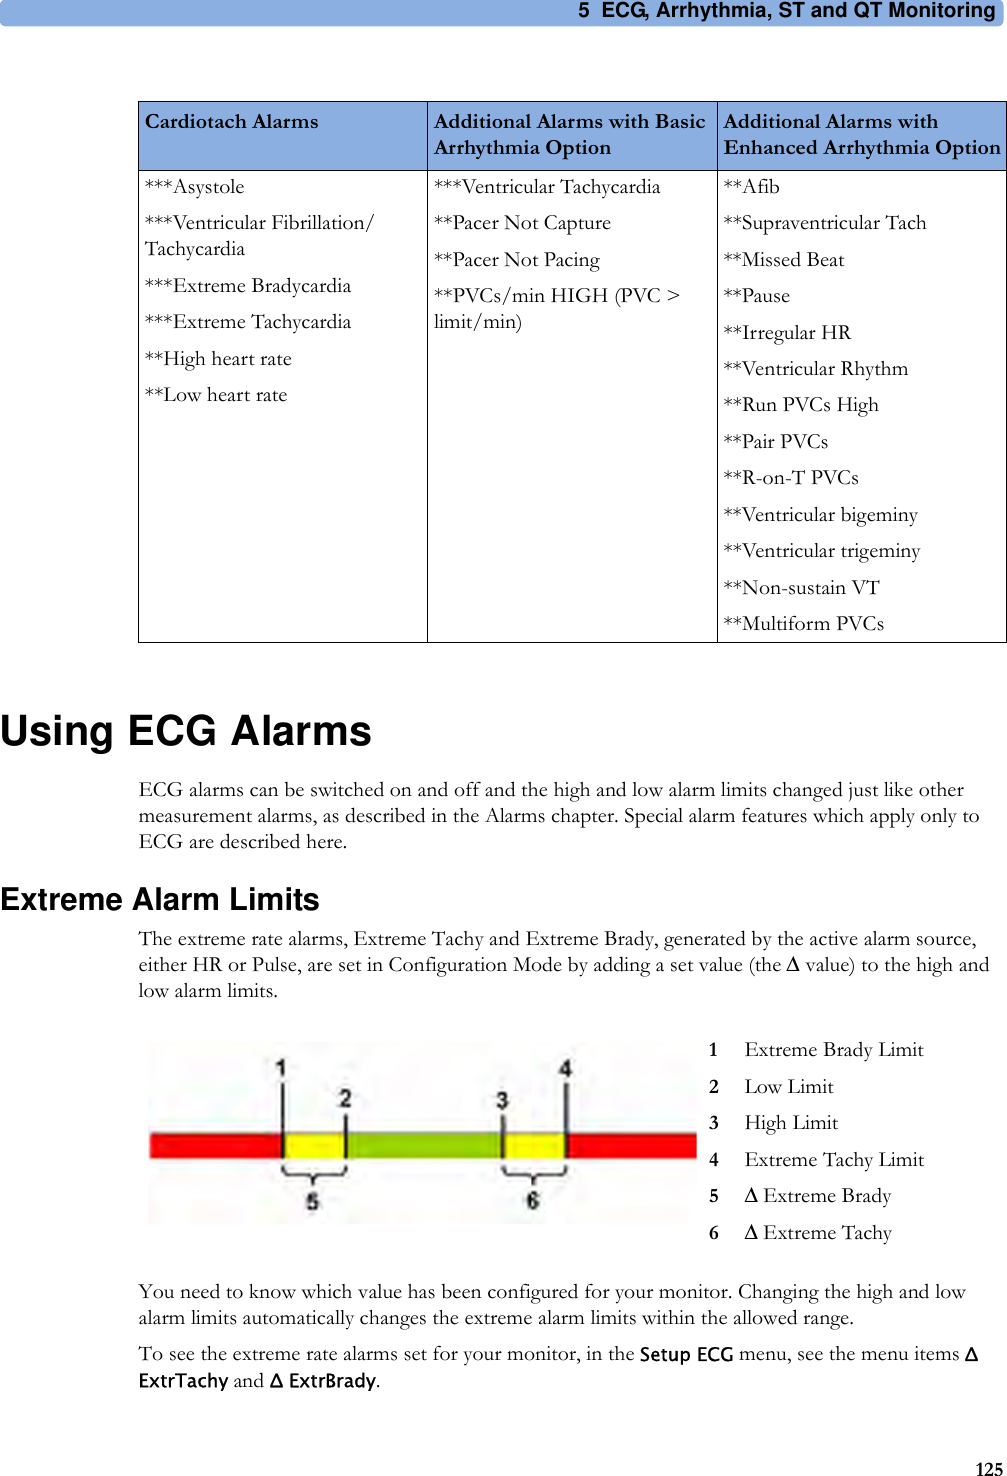 5 ECG, Arrhythmia, ST and QT Monitoring125Using ECG AlarmsECG alarms can be switched on and off and the high and low alarm limits changed just like other measurement alarms, as described in the Alarms chapter. Special alarm features which apply only to ECG are described here.Extreme Alarm LimitsThe extreme rate alarms, Extreme Tachy and Extreme Brady, generated by the active alarm source, either HR or Pulse, are set in Configuration Mode by adding a set value (the Δ value) to the high and low alarm limits.You need to know which value has been configured for your monitor. Changing the high and low alarm limits automatically changes the extreme alarm limits within the allowed range.To see the extreme rate alarms set for your monitor, in the Setup ECG menu, see the menu items Δ ExtrTachy and Δ ExtrBrady.Cardiotach Alarms Additional Alarms with Basic Arrhythmia OptionAdditional Alarms with Enhanced Arrhythmia Option***Asystole***Ventricular Fibrillation/Tachycardia***Extreme Bradycardia***Extreme Tachycardia**High heart rate**Low heart rate***Ventricular Tachycardia**Pacer Not Capture**Pacer Not Pacing**PVCs/min HIGH (PVC &gt; limit/min)**Afib**Supraventricular Tach**Missed Beat**Pause**Irregular HR**Ventricular Rhythm**Run PVCs High**Pair PVCs**R-on-T PVCs**Ventricular bigeminy**Ventricular trigeminy**Non-sustain VT**Multiform PVCs1Extreme Brady Limit2Low Limit3High Limit4Extreme Tachy Limit5Δ Extreme Brady6Δ Extreme Tachy